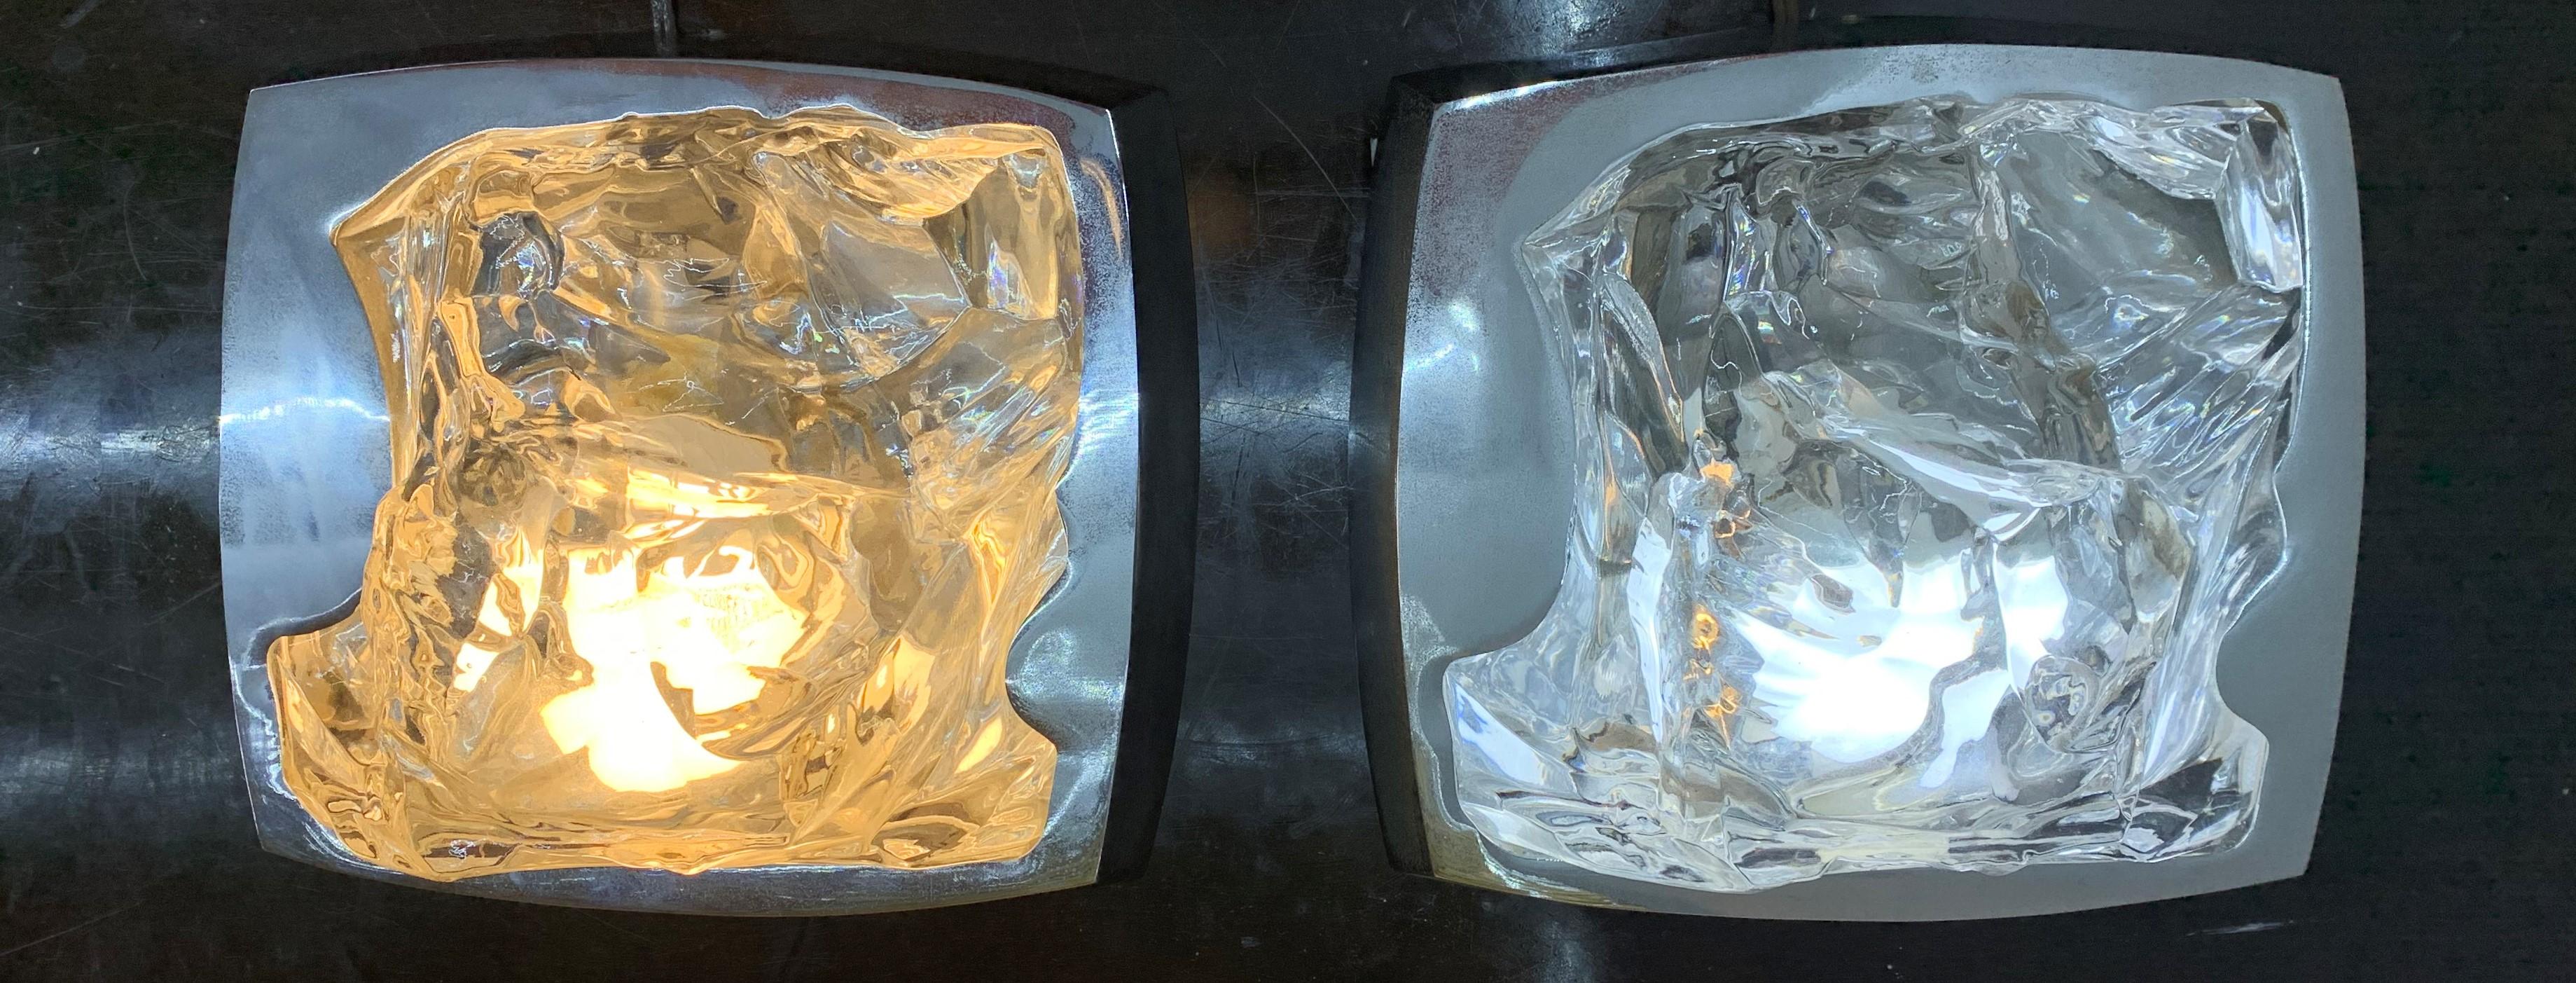 Pair of Mid-Century Modern sconces by Hillebrand, Germany in chromed brass and heavy pressed glass resembling ice.
West Germany, circa 1970, copper.